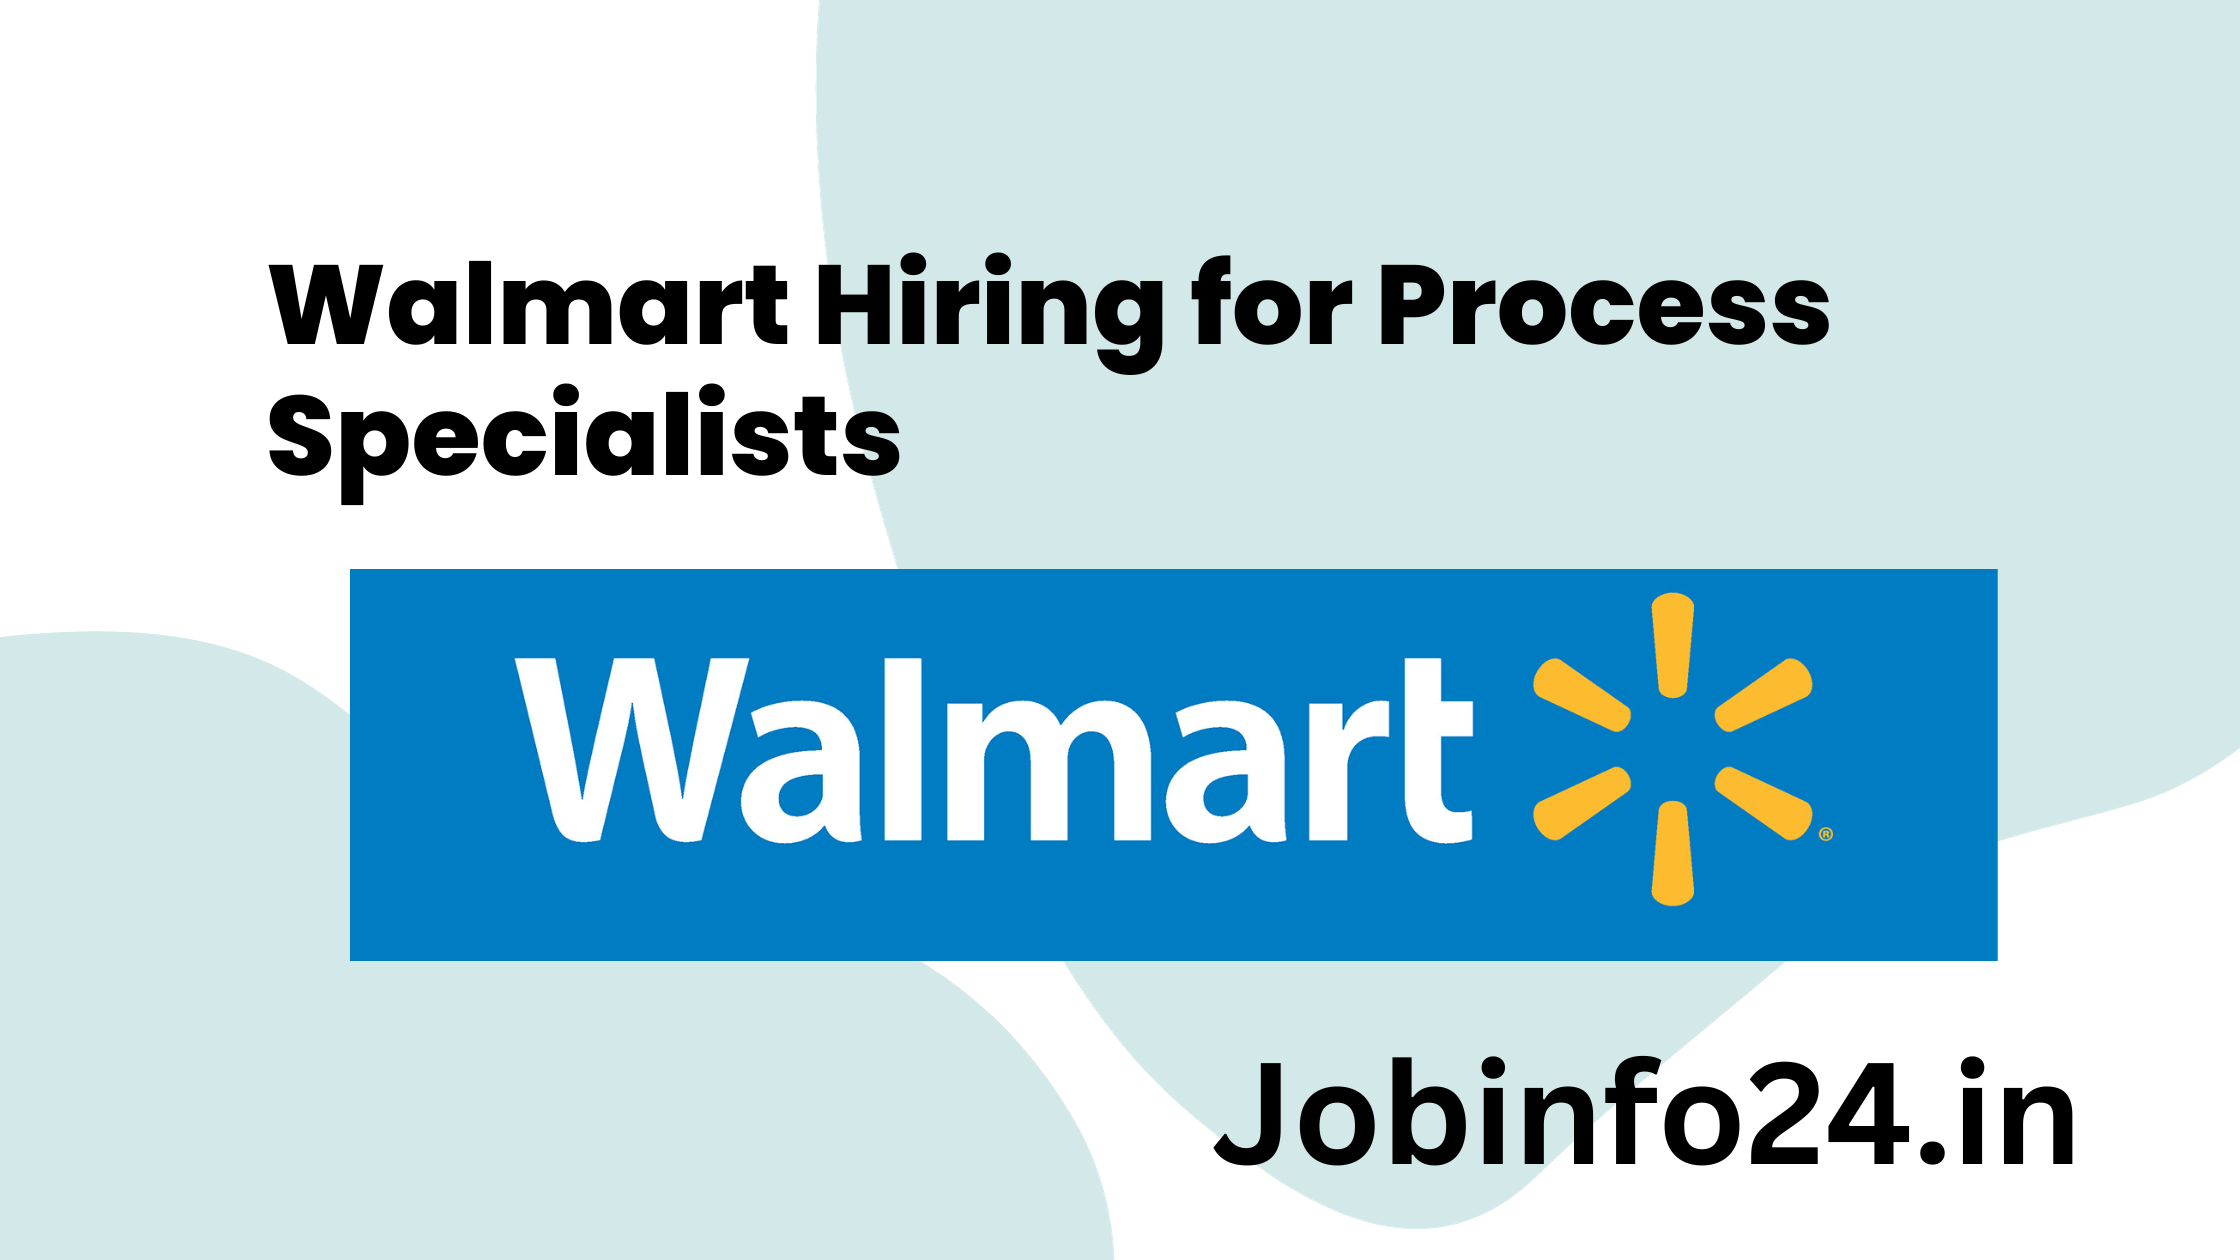 Walmart Hiring for Process Specialists